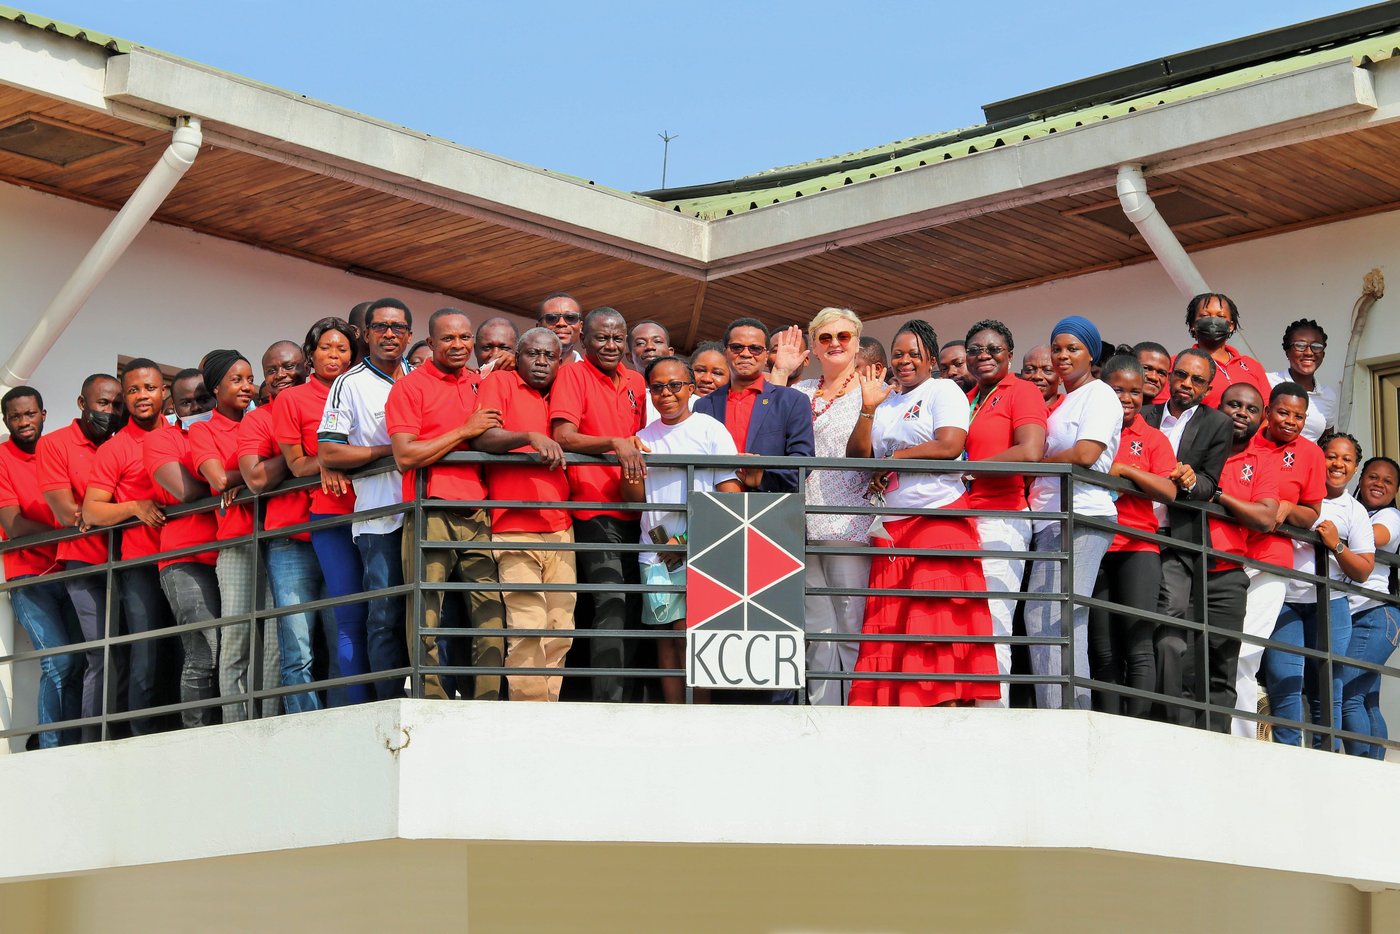 KCCR employees in predominantly red T-shirts stand on the balcony of the institute, some waving. At the front in the middle are the scientific director Prof. Phillips and the managing director Ingrid Sobel.